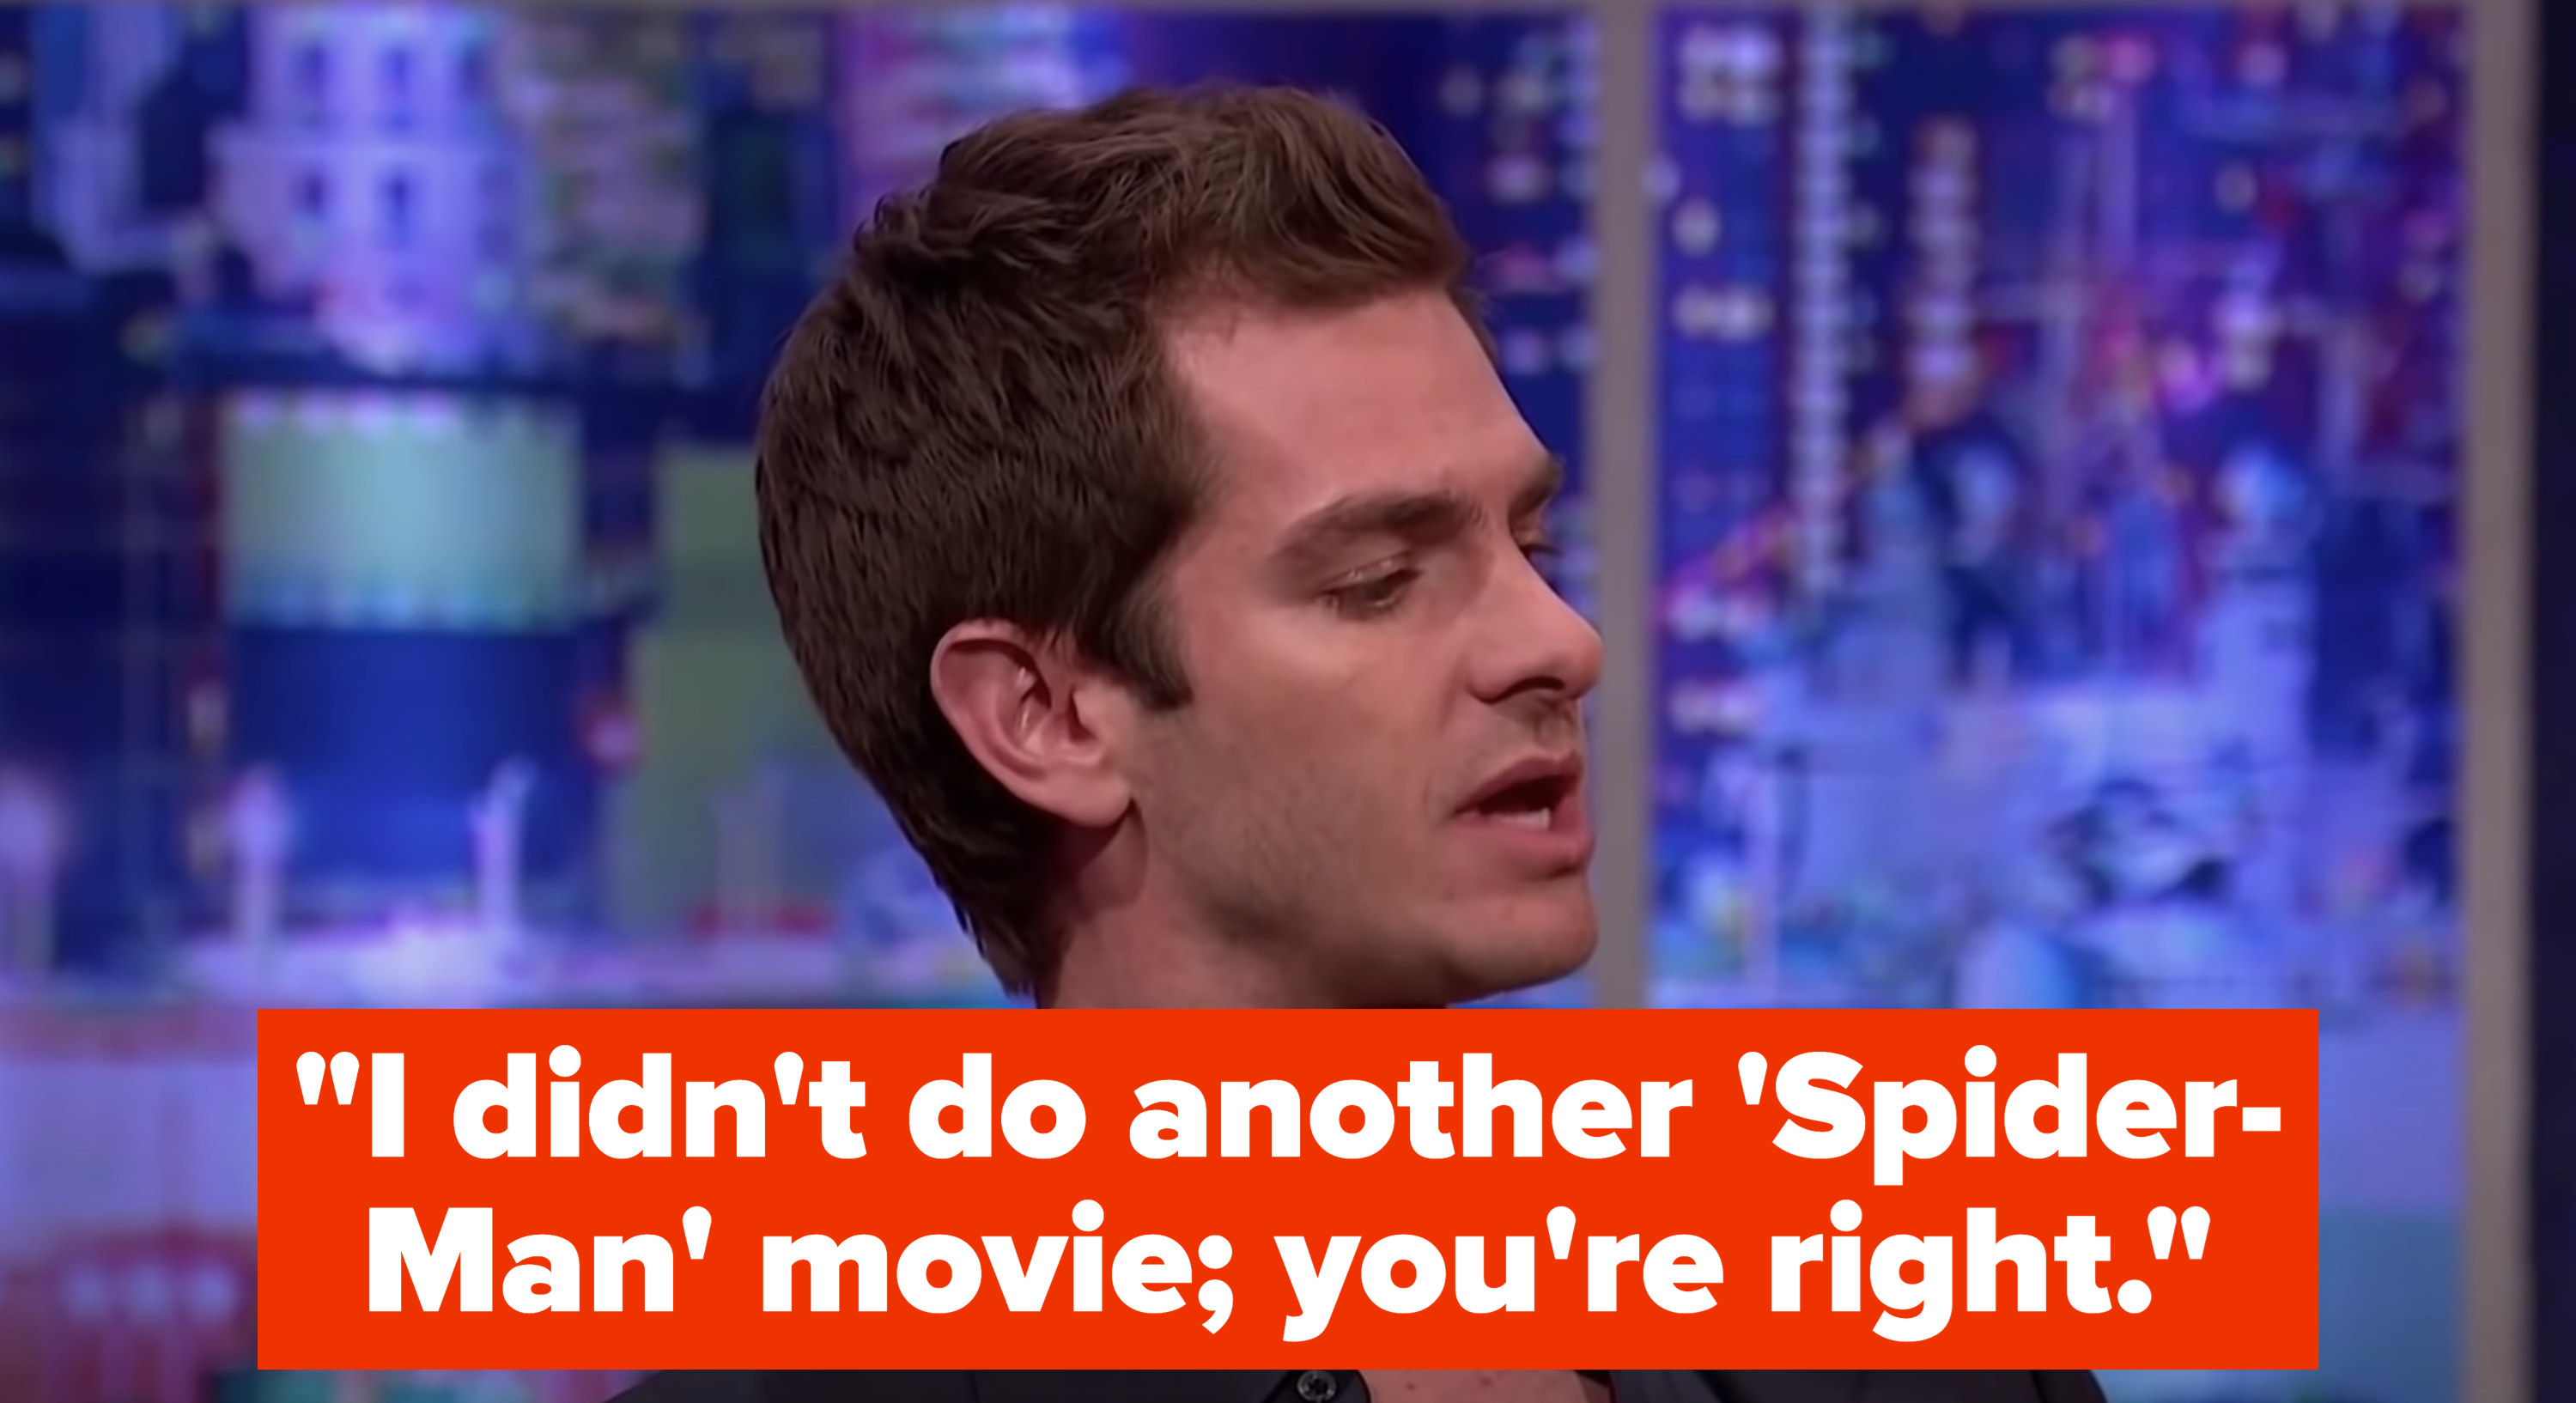 Andrew says &quot;I didn&#x27;t do another &#x27;Spider-Man&#x27; movie; you&#x27;re right&quot;